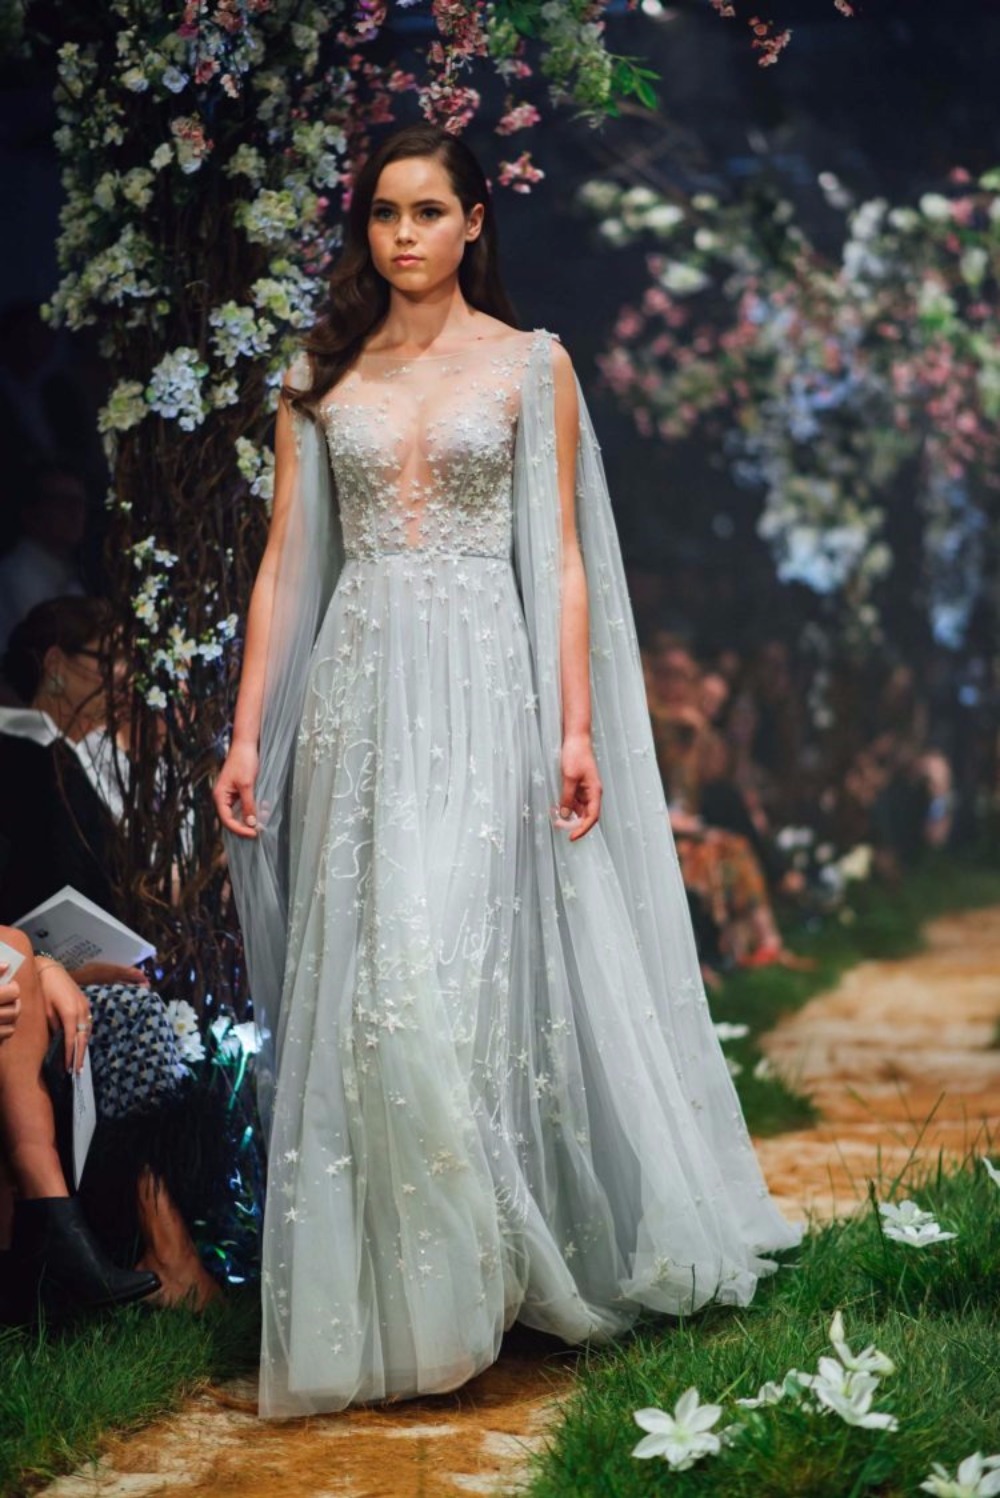 620898_new-disney-wedding-dresses-by-paolo